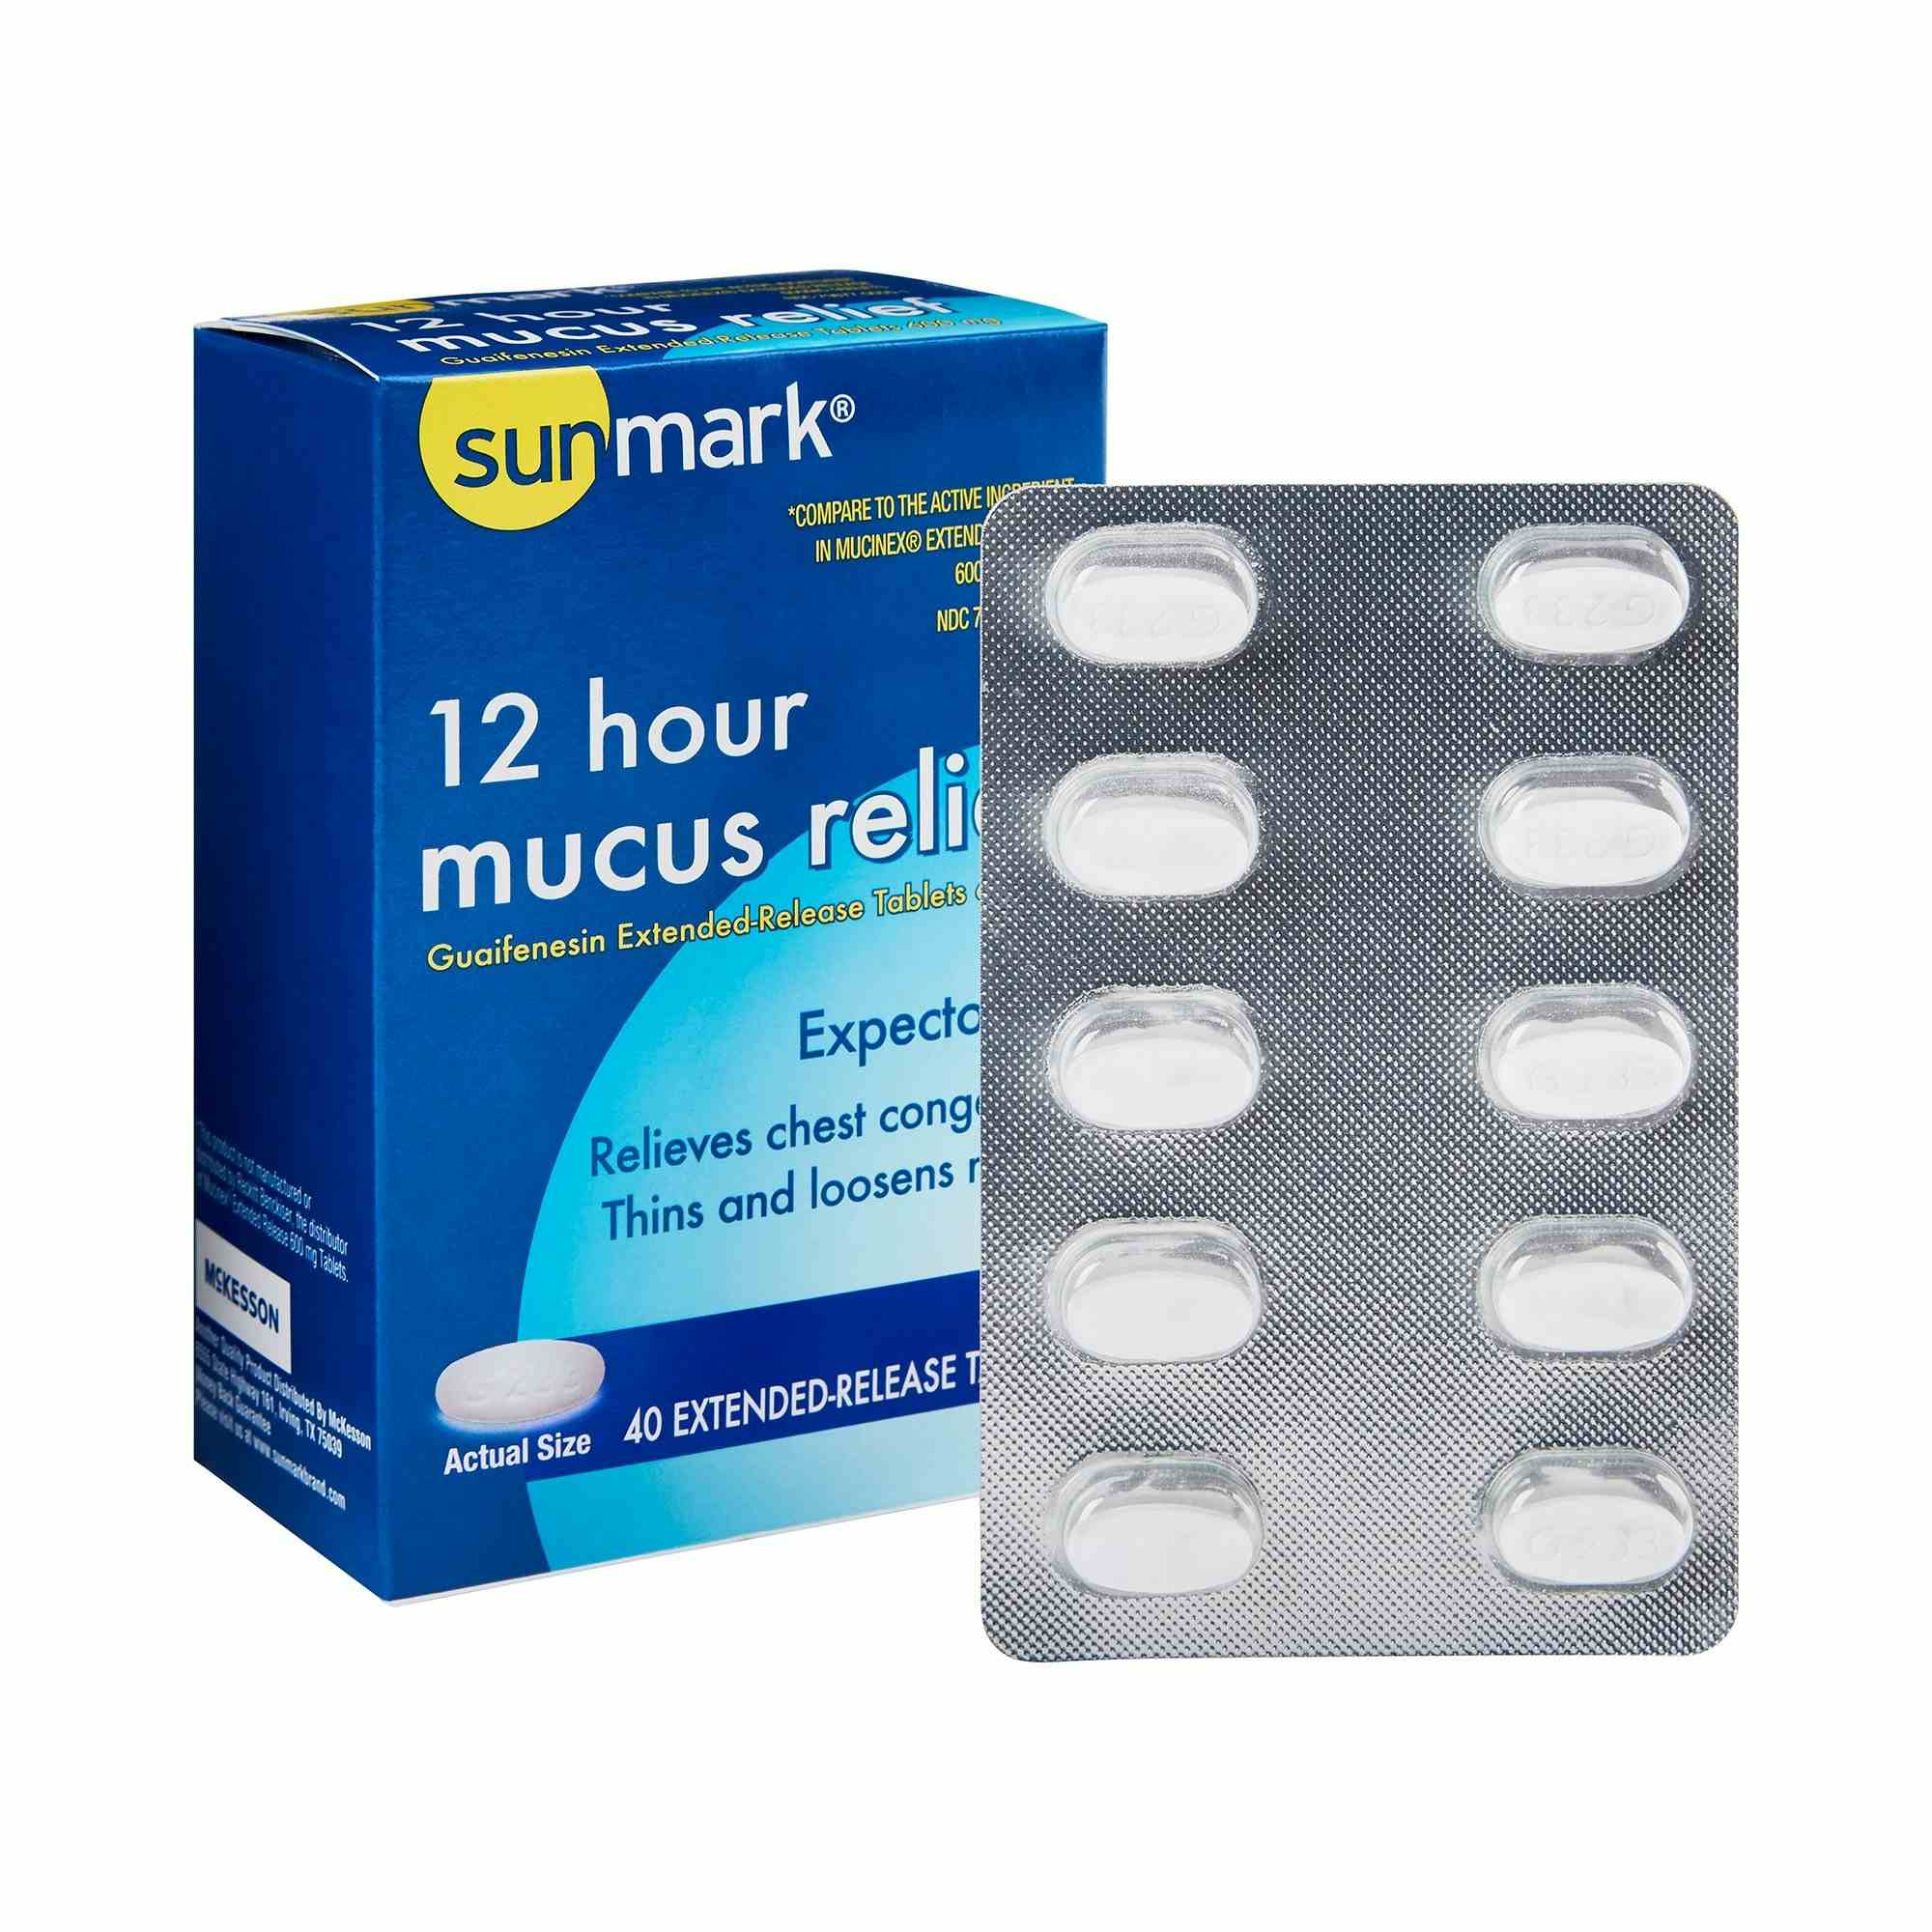 sunmark 12 Hour Mucus Relief Tablets, 600 mg, 70677005501, 40 Tablets - 1 Bottle